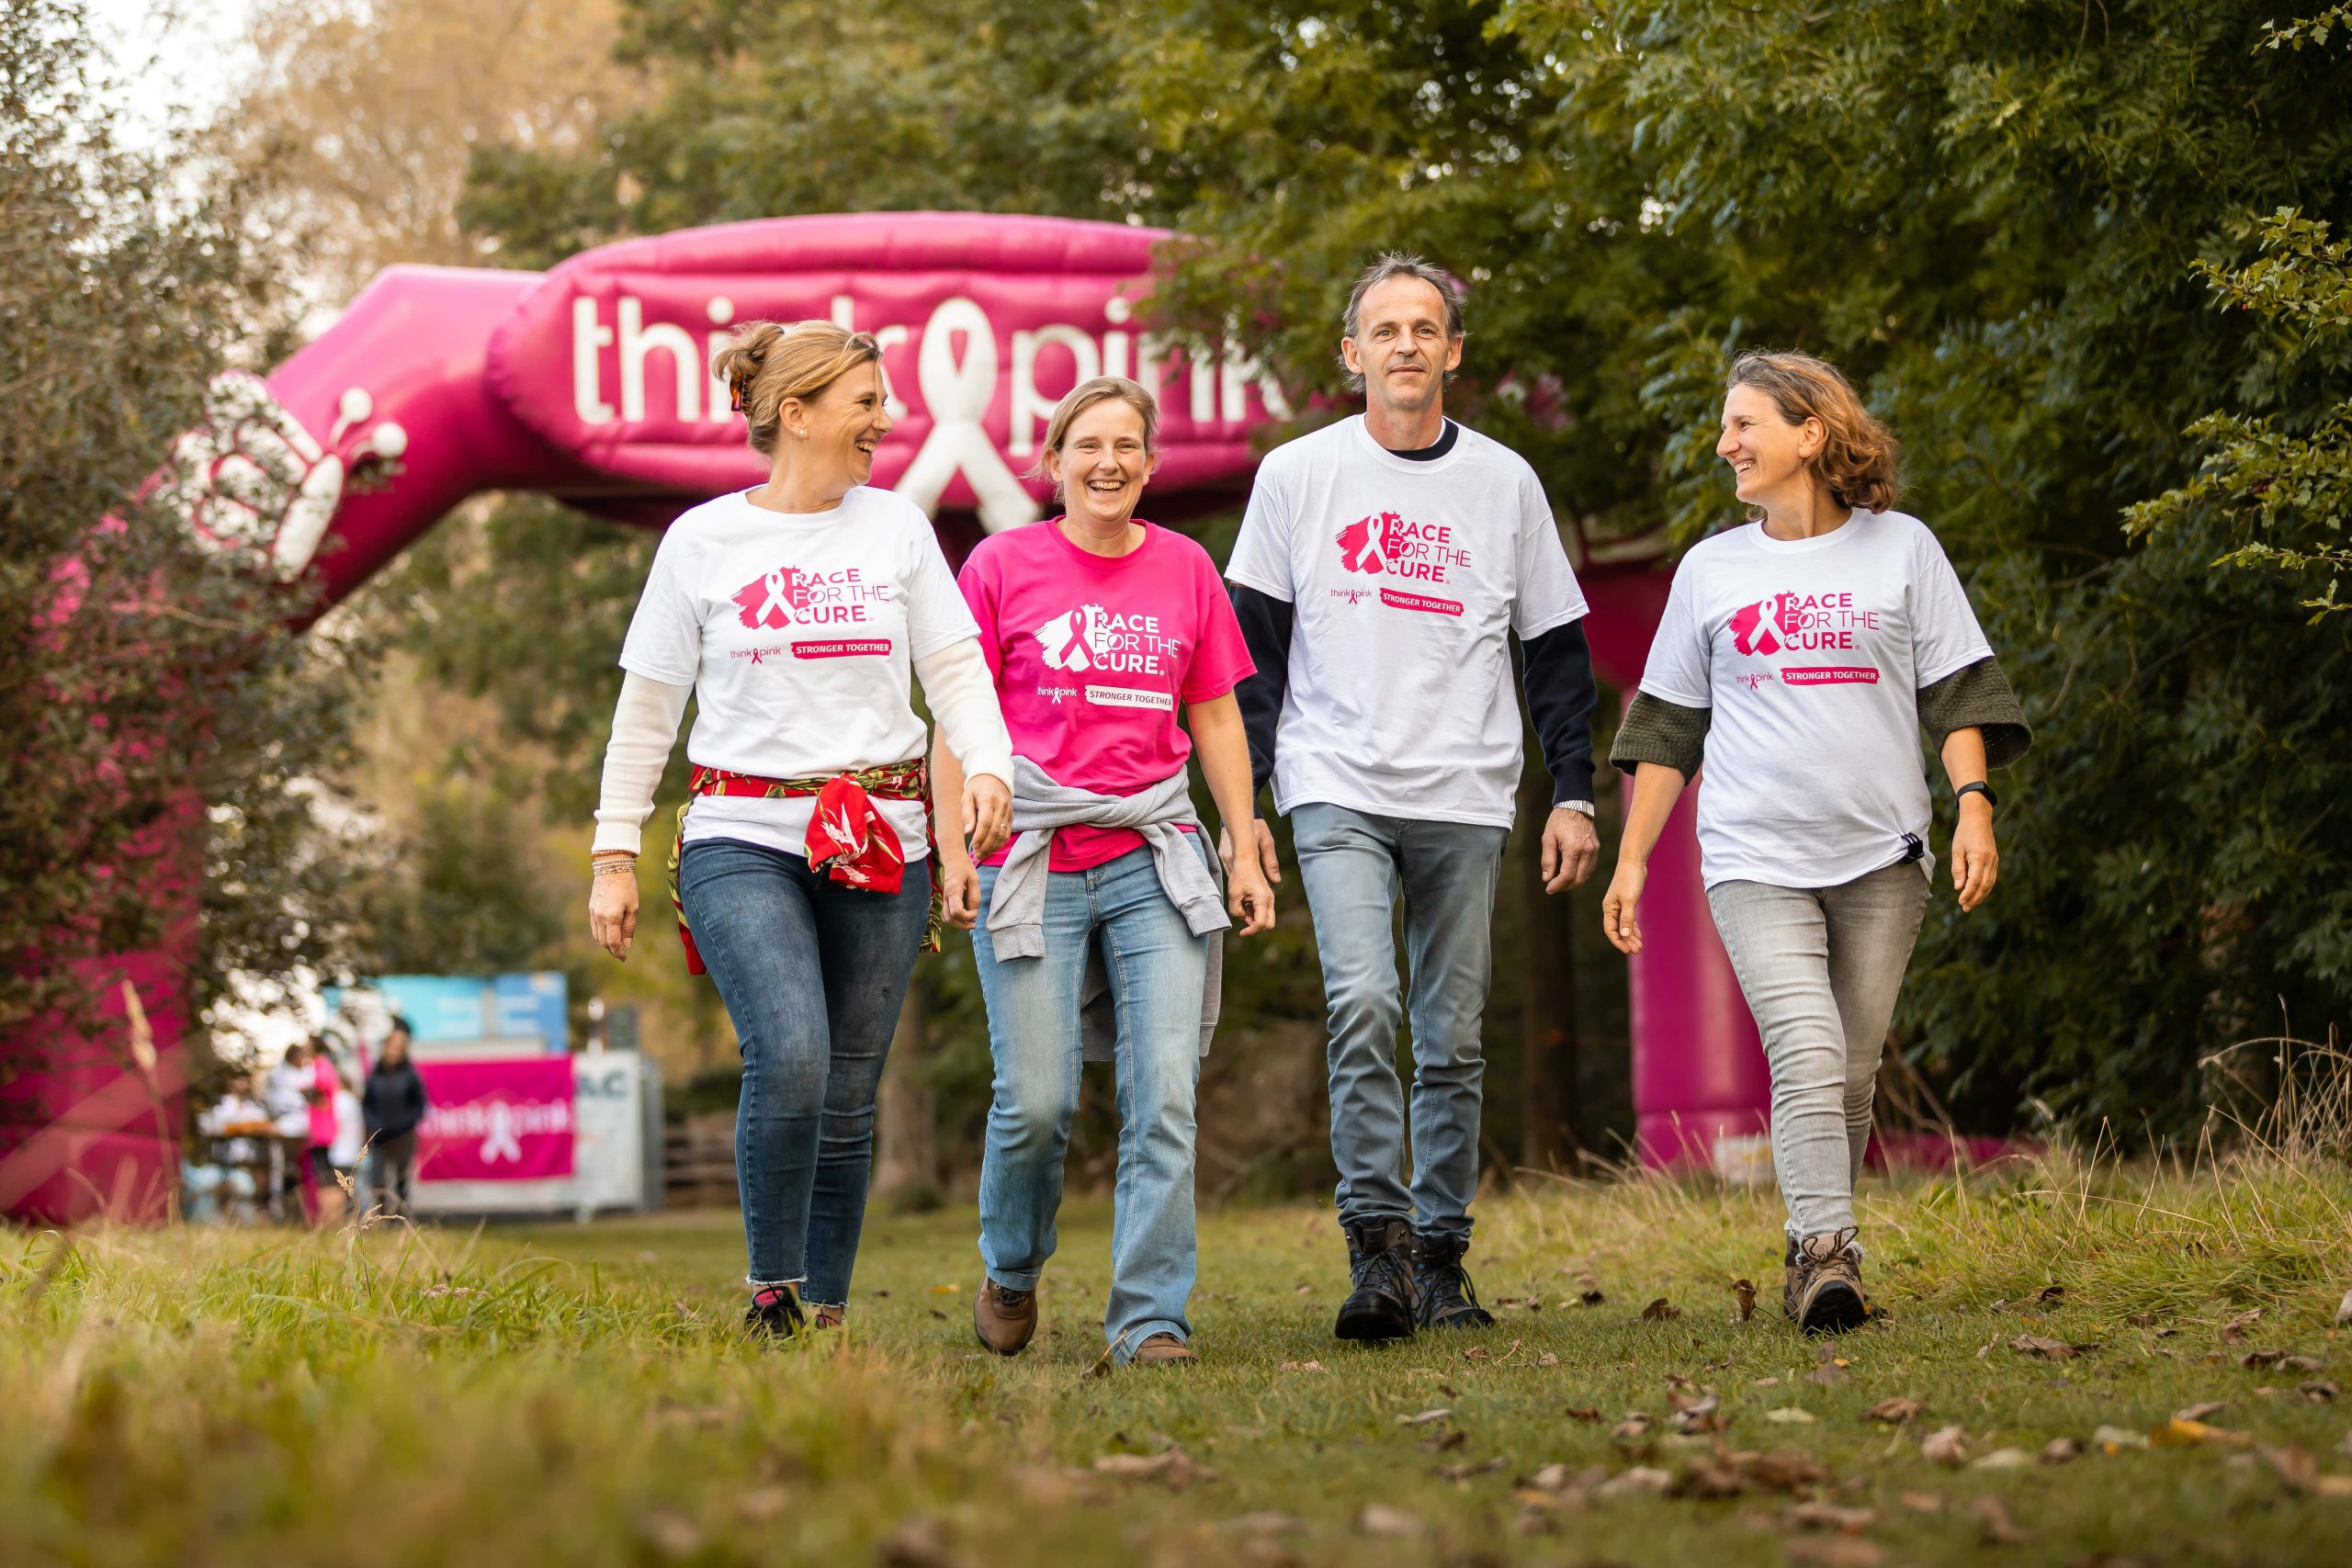 Race for cure in Gent